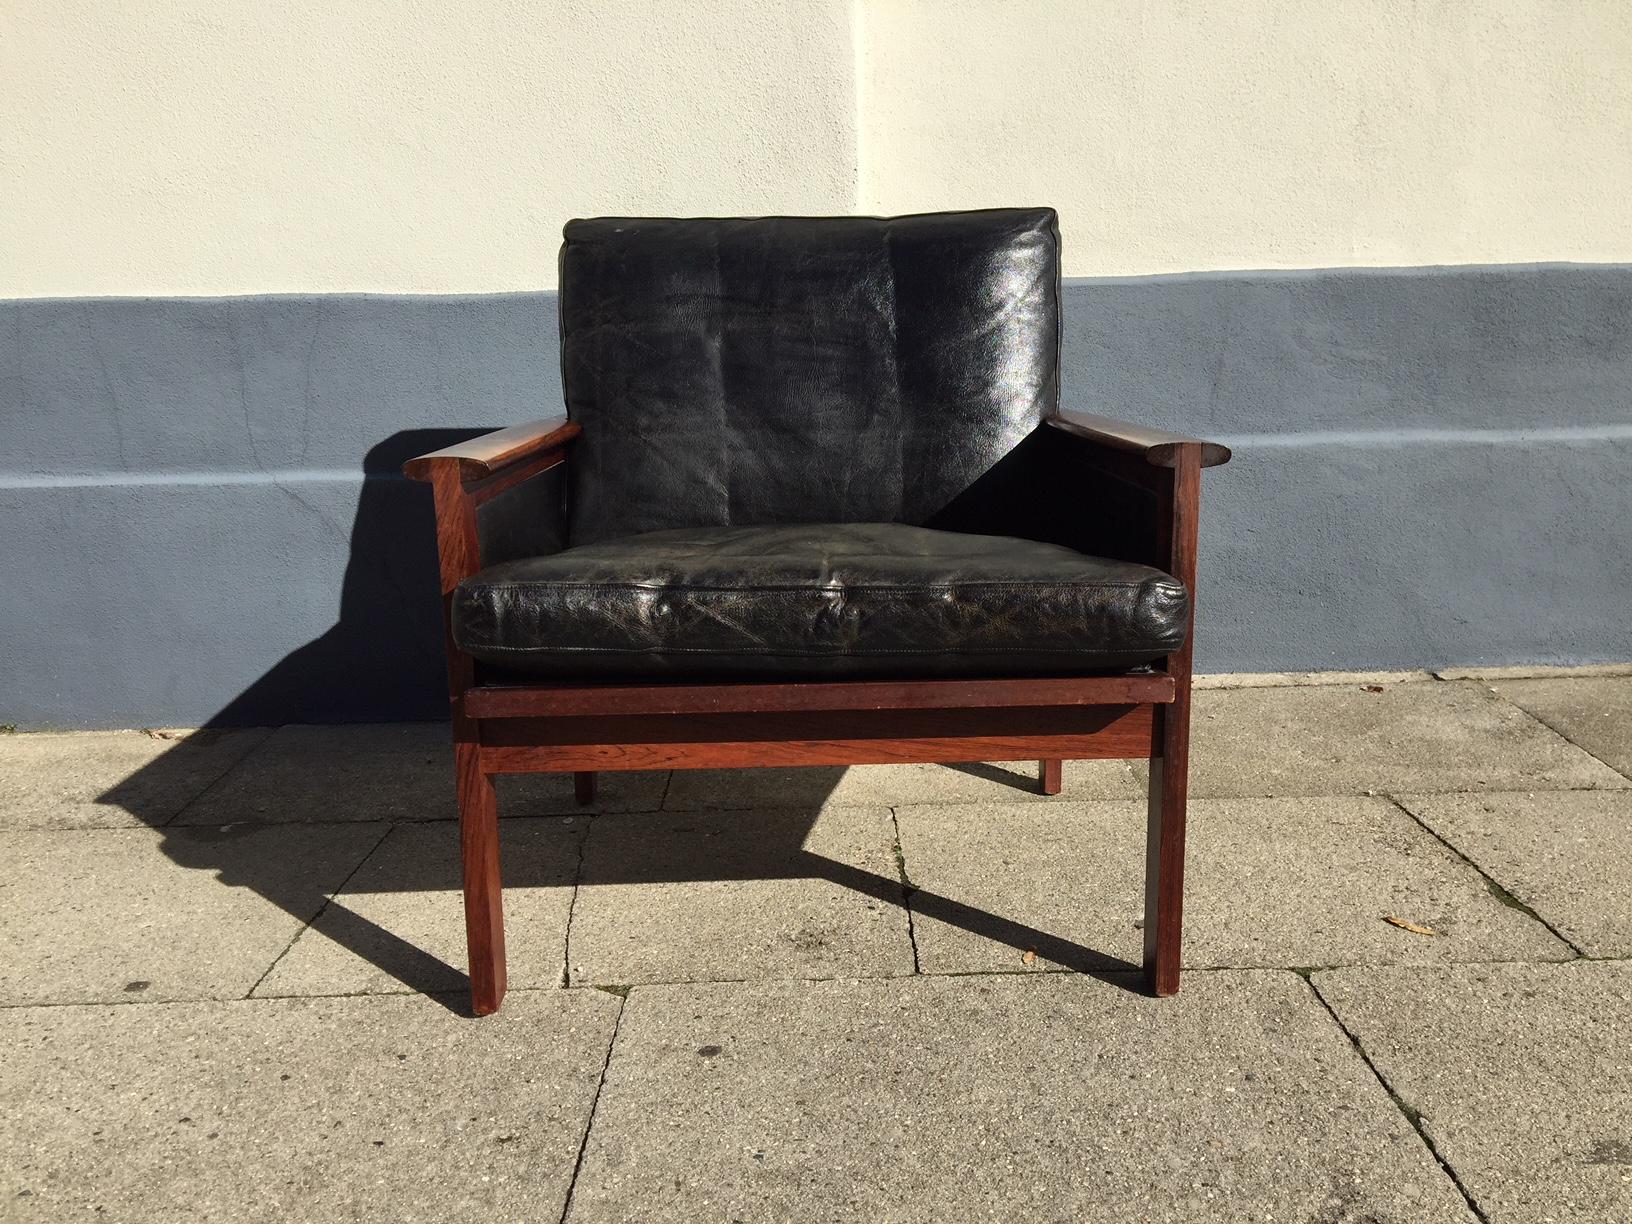 This lounge chair No. 4 or the Capella chair was designed by Illum Wikkelsø in 1959 and manufactured by Niels Erik Eilersen in the early 1960s. It features original black leather upholstery and solid rosewood frame, seat and armrests. Please notice